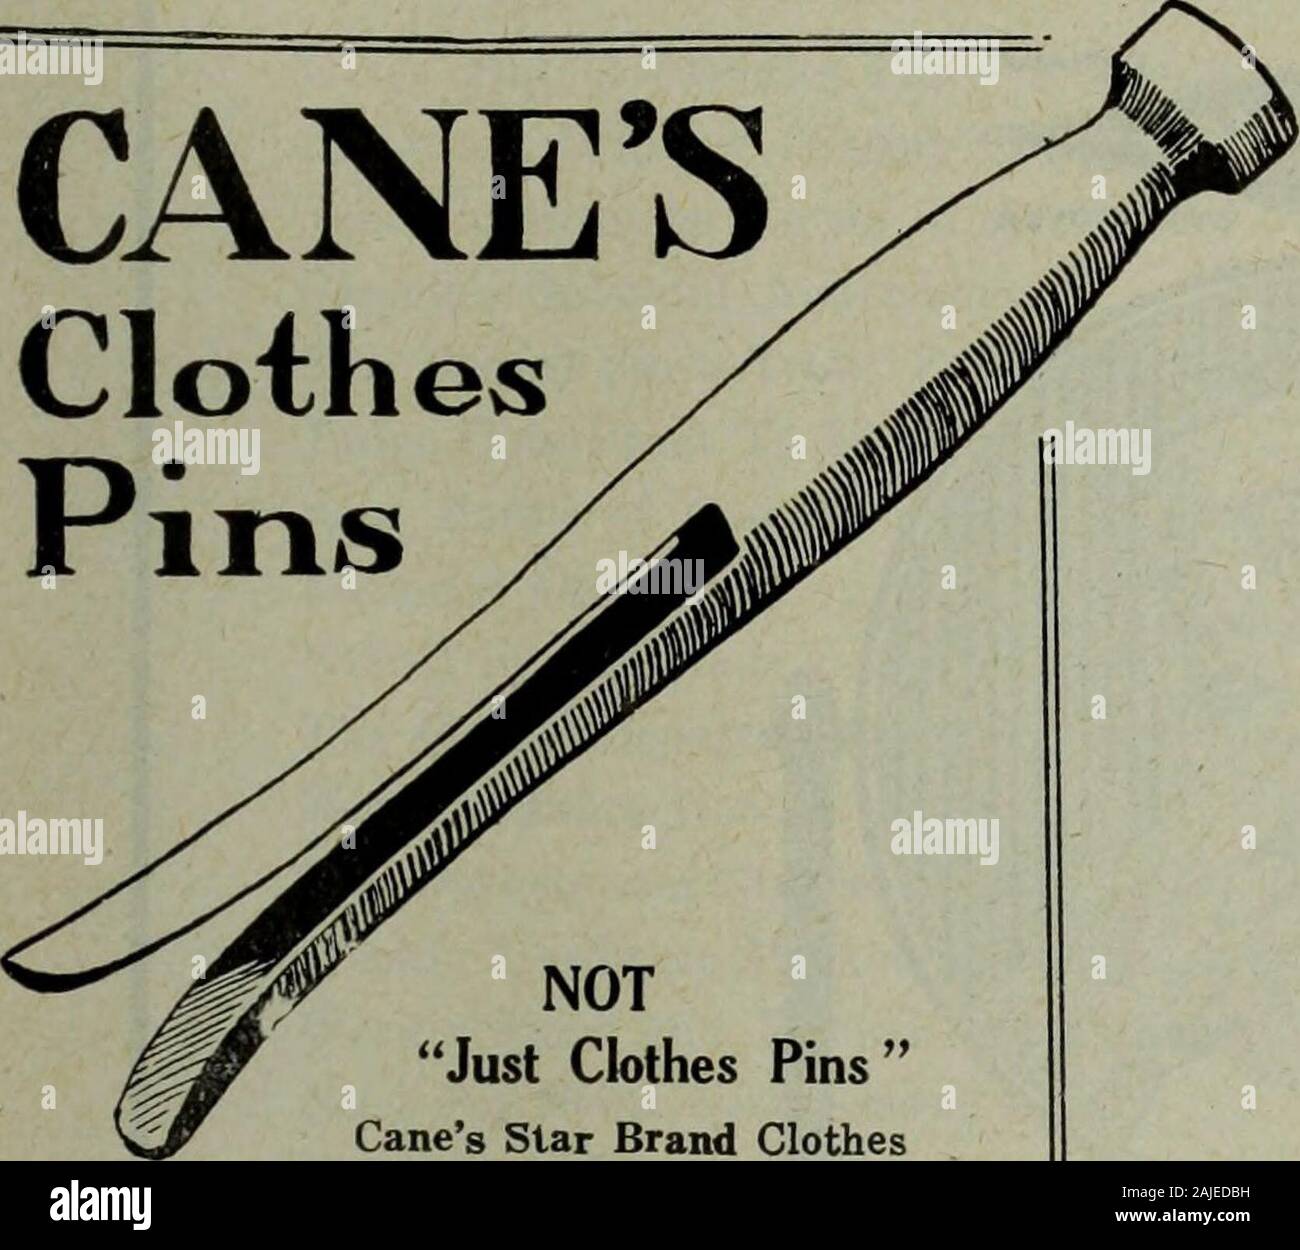 Hardware merchandising September-December 1919 . CHICAGO NEW YORK Send for Catalogue M-36. CANES Clothes Pins NOT Just Clothes Pins Canes Star Brand ClothesPins are better—they costno more than just clothespins—but theres a dif-ference.Star Brand are always right in shape,right in length and correct in count.They will not injure the clothes. Your Jobber will be pleased to supplyStar Brand Superior Clothes Pins atno extra cost. The Wm. CANE & SONS Co., Limited MANUFACTURERSNewmarket Ontario HerculesSashCord The reputation of thisbrand has been thor-oughly established inthe Canadian marketfor th Stock Photo